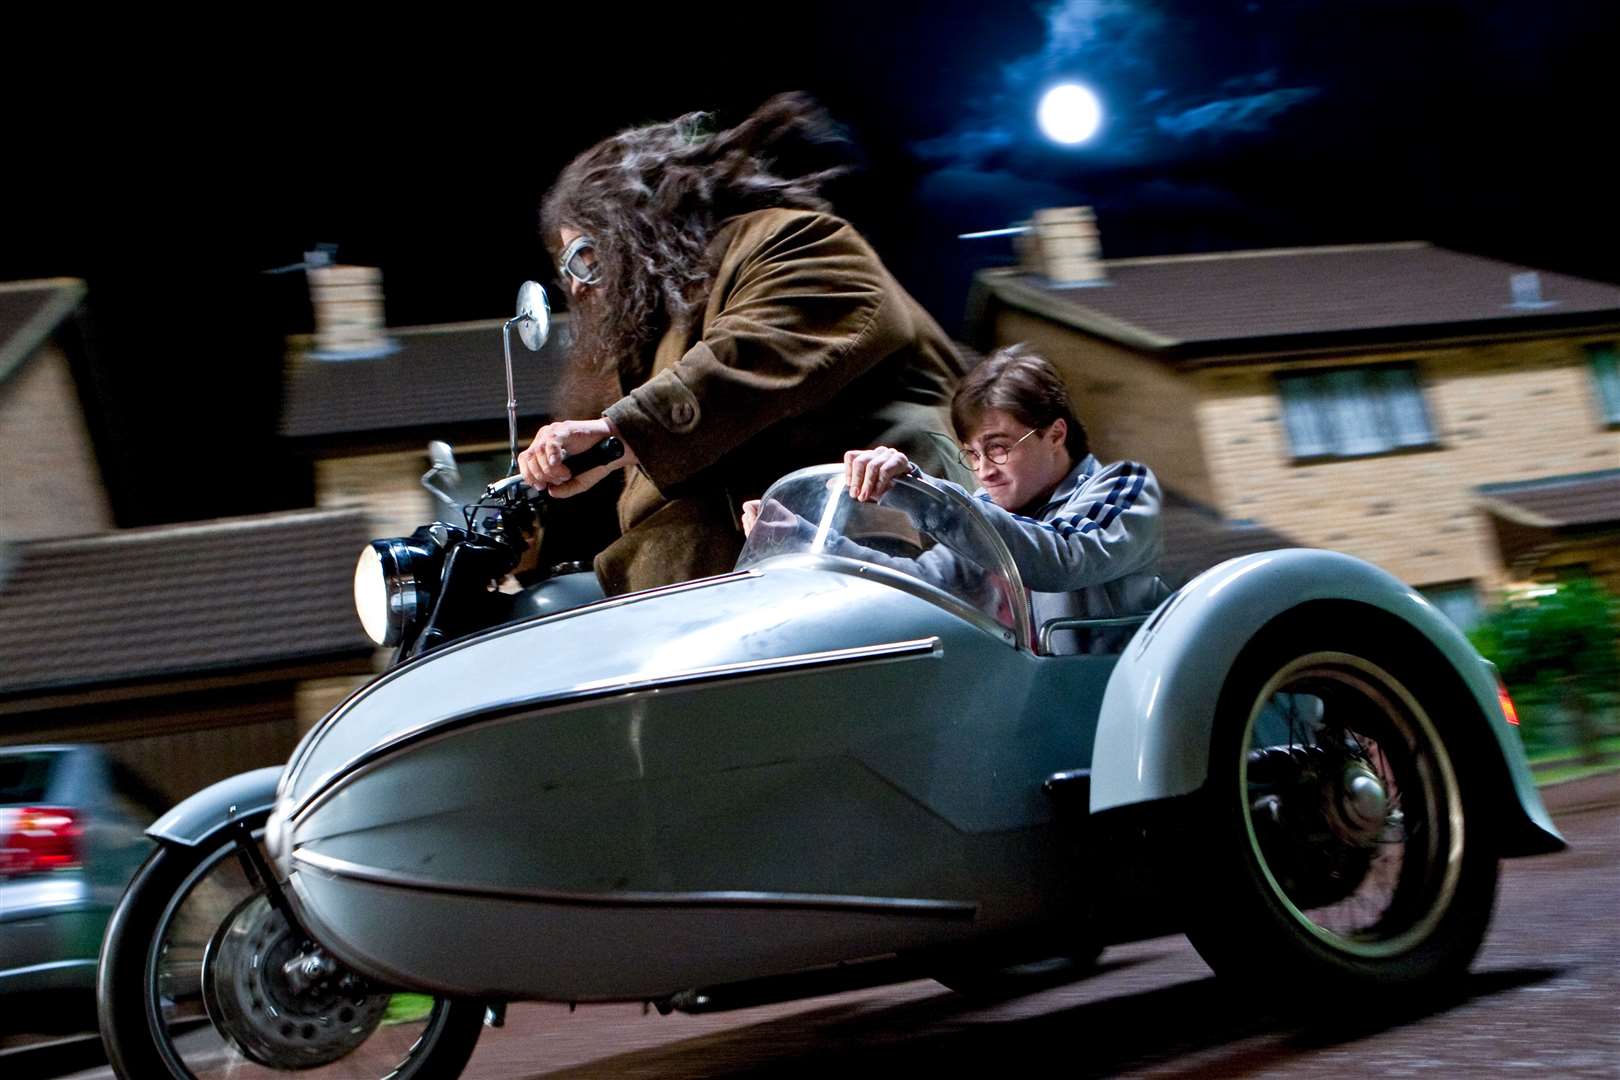 Hagrid escorts Harry Potter away from Death Eaters moments before Hedwig dies above Dartford